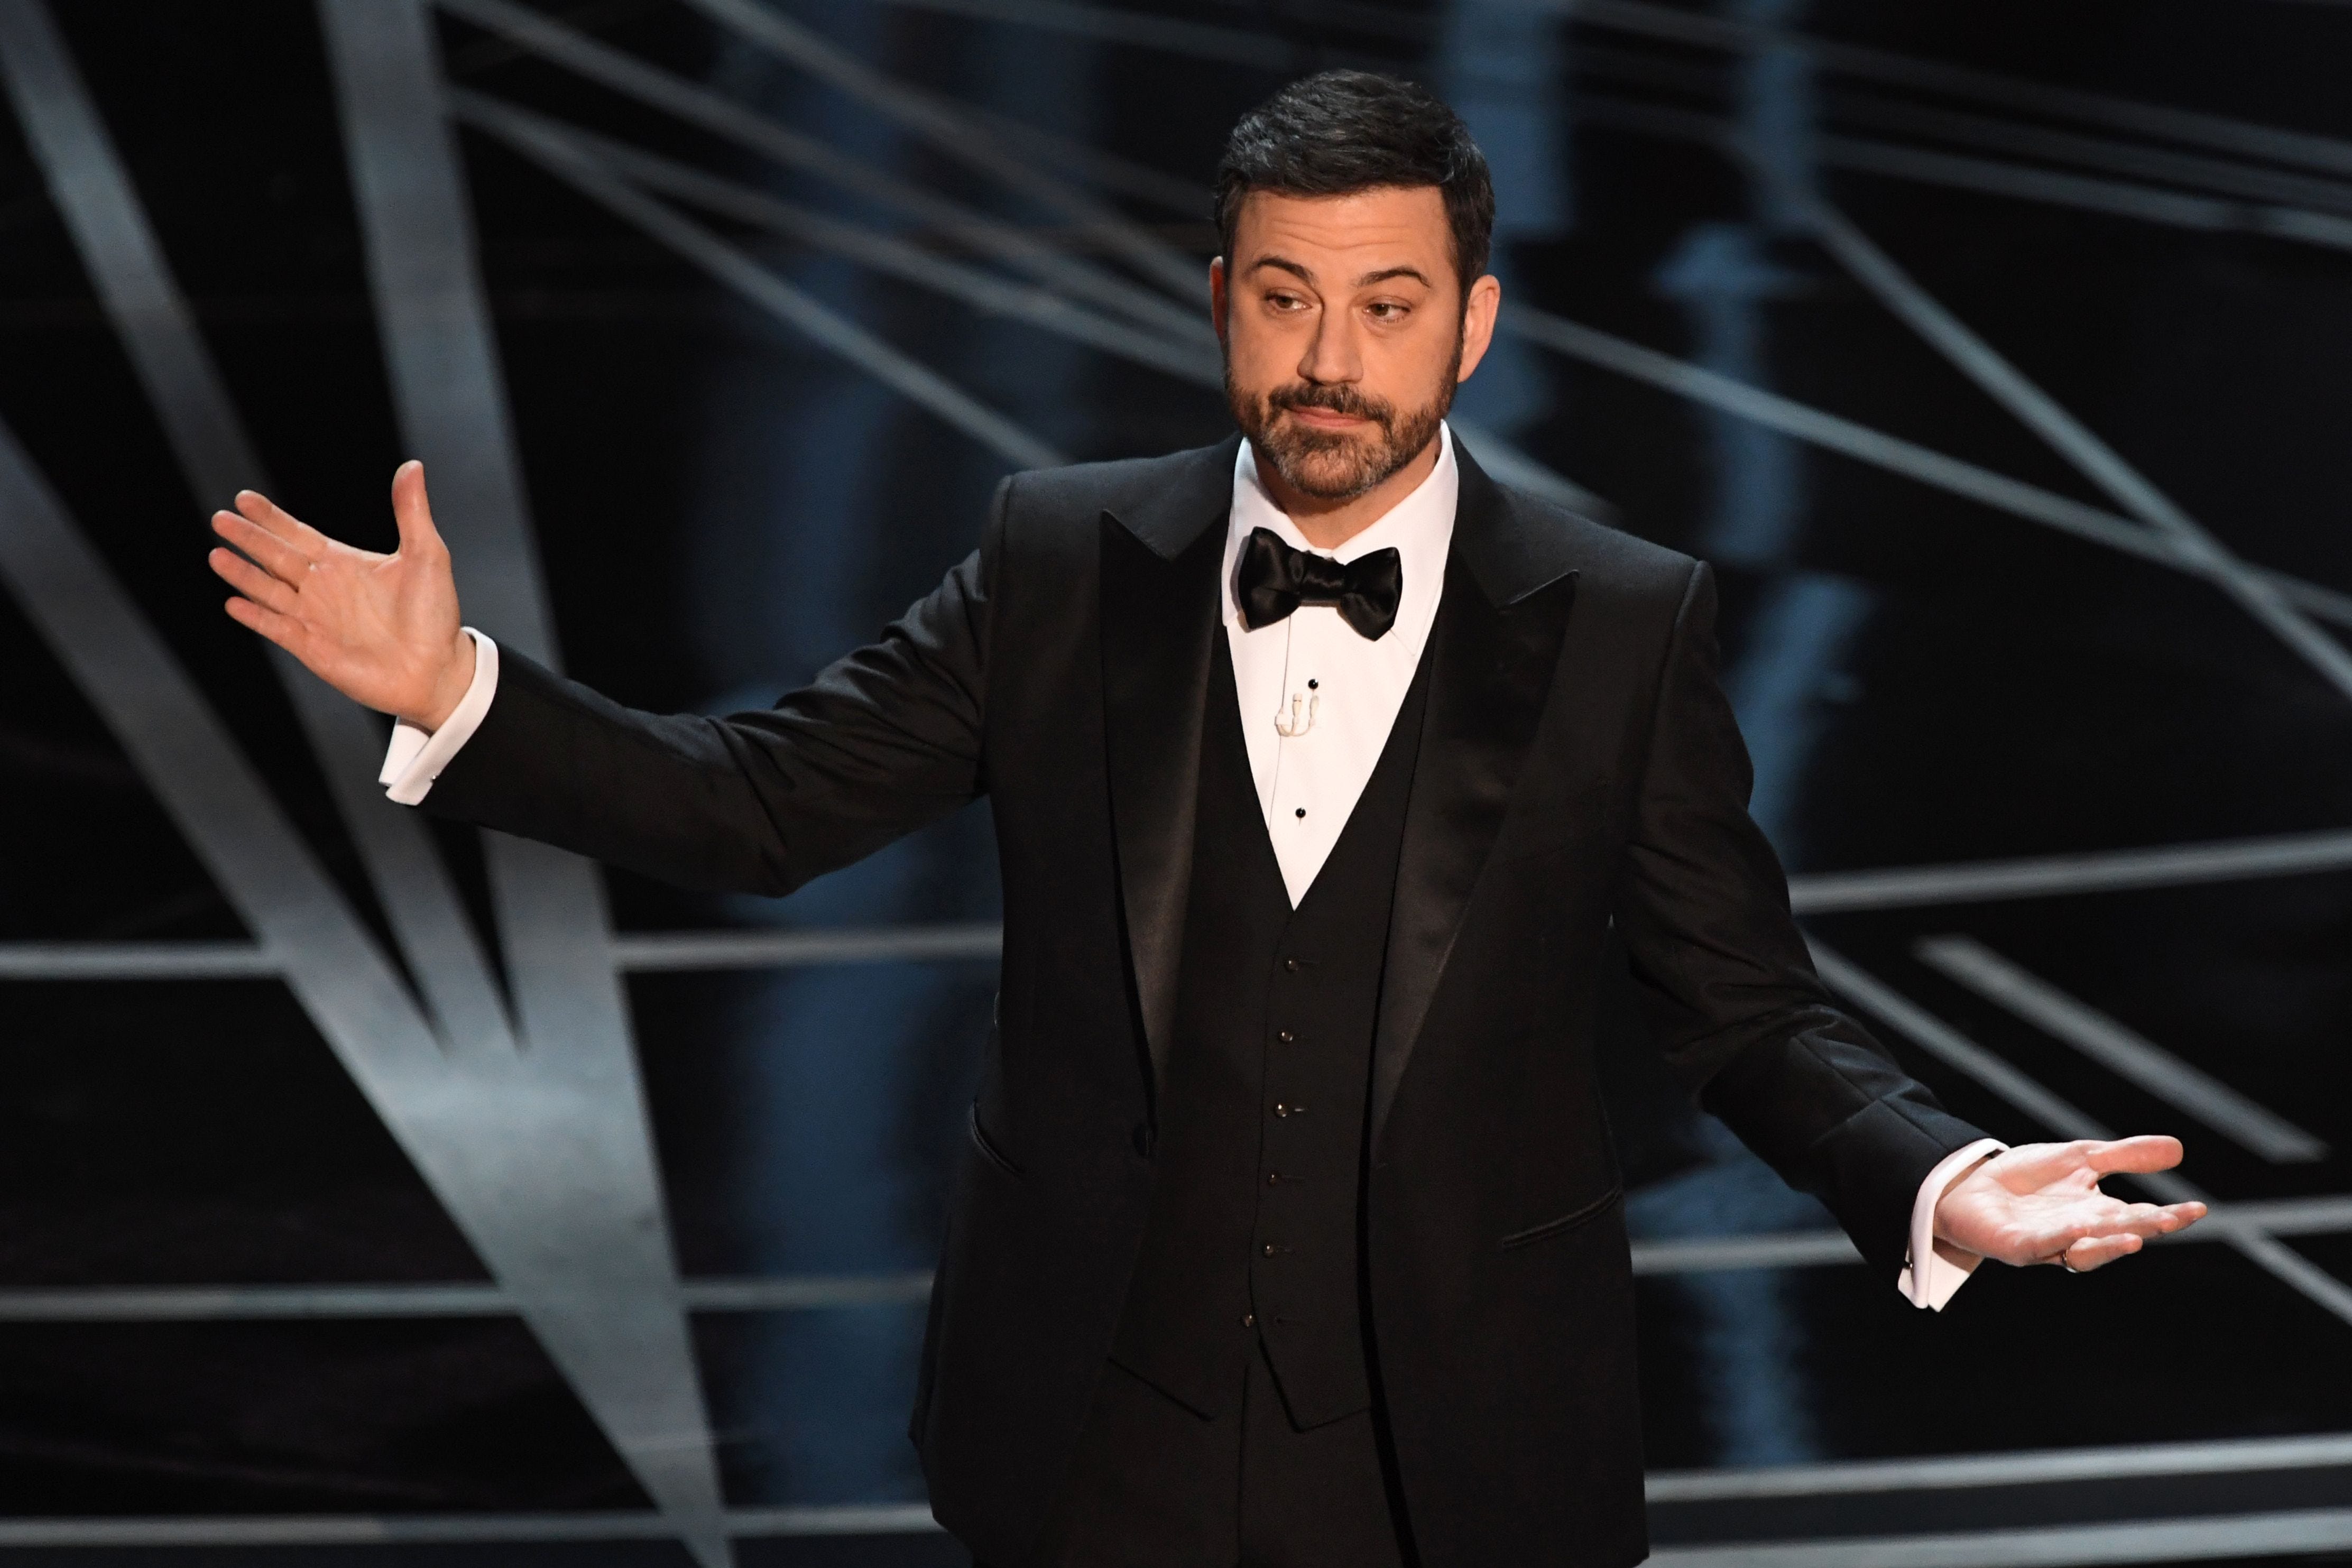 Jimmy Kimmel to host 2023 Oscars: 'Either a great honor or a trap'